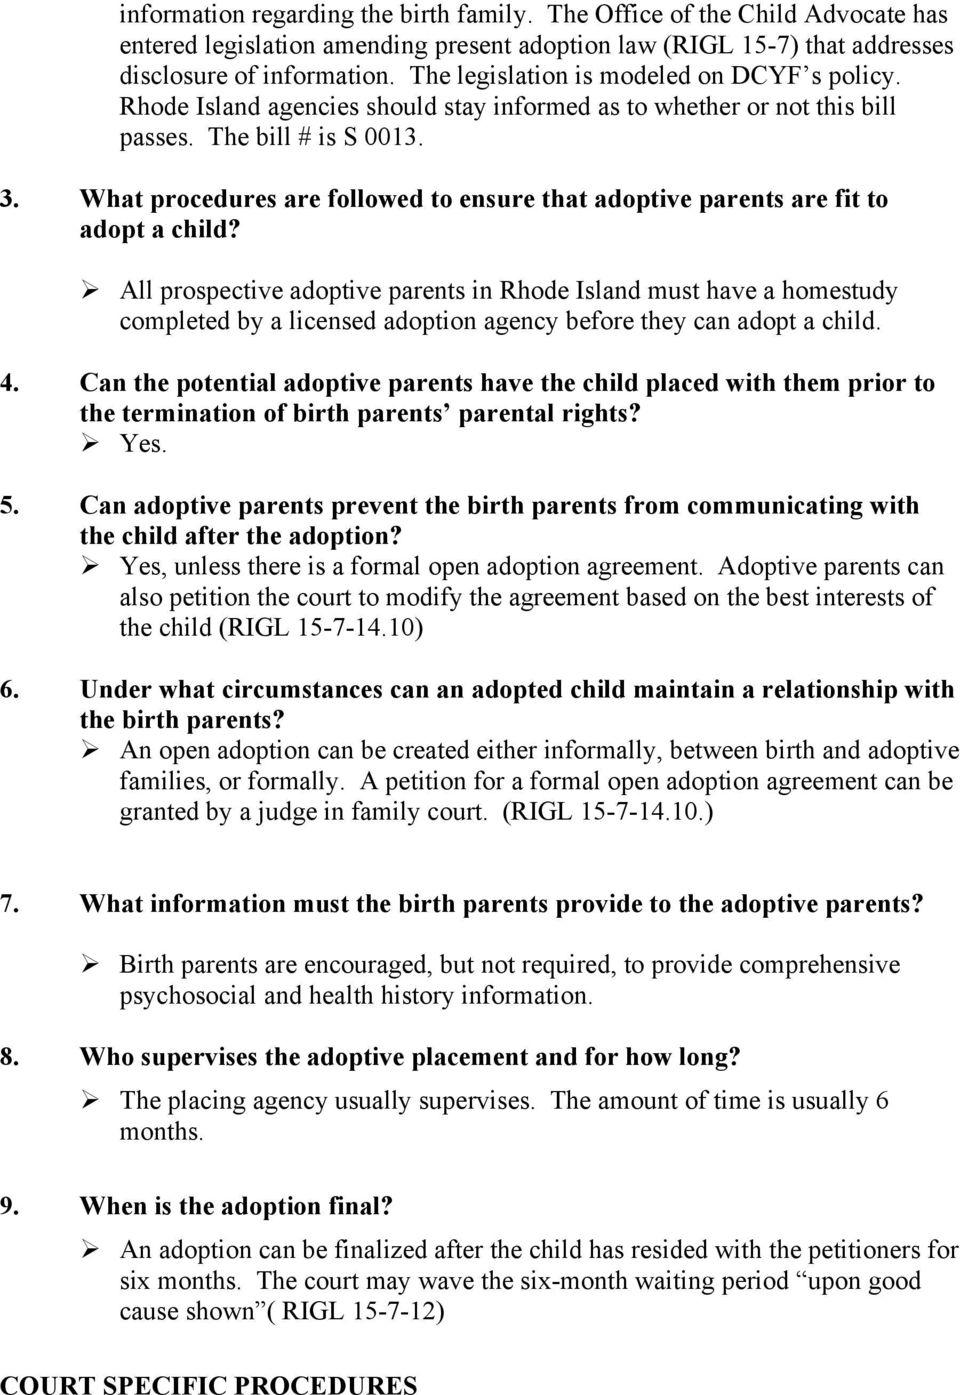 What procedures are followed to ensure that adoptive parents are fit to adopt a child?